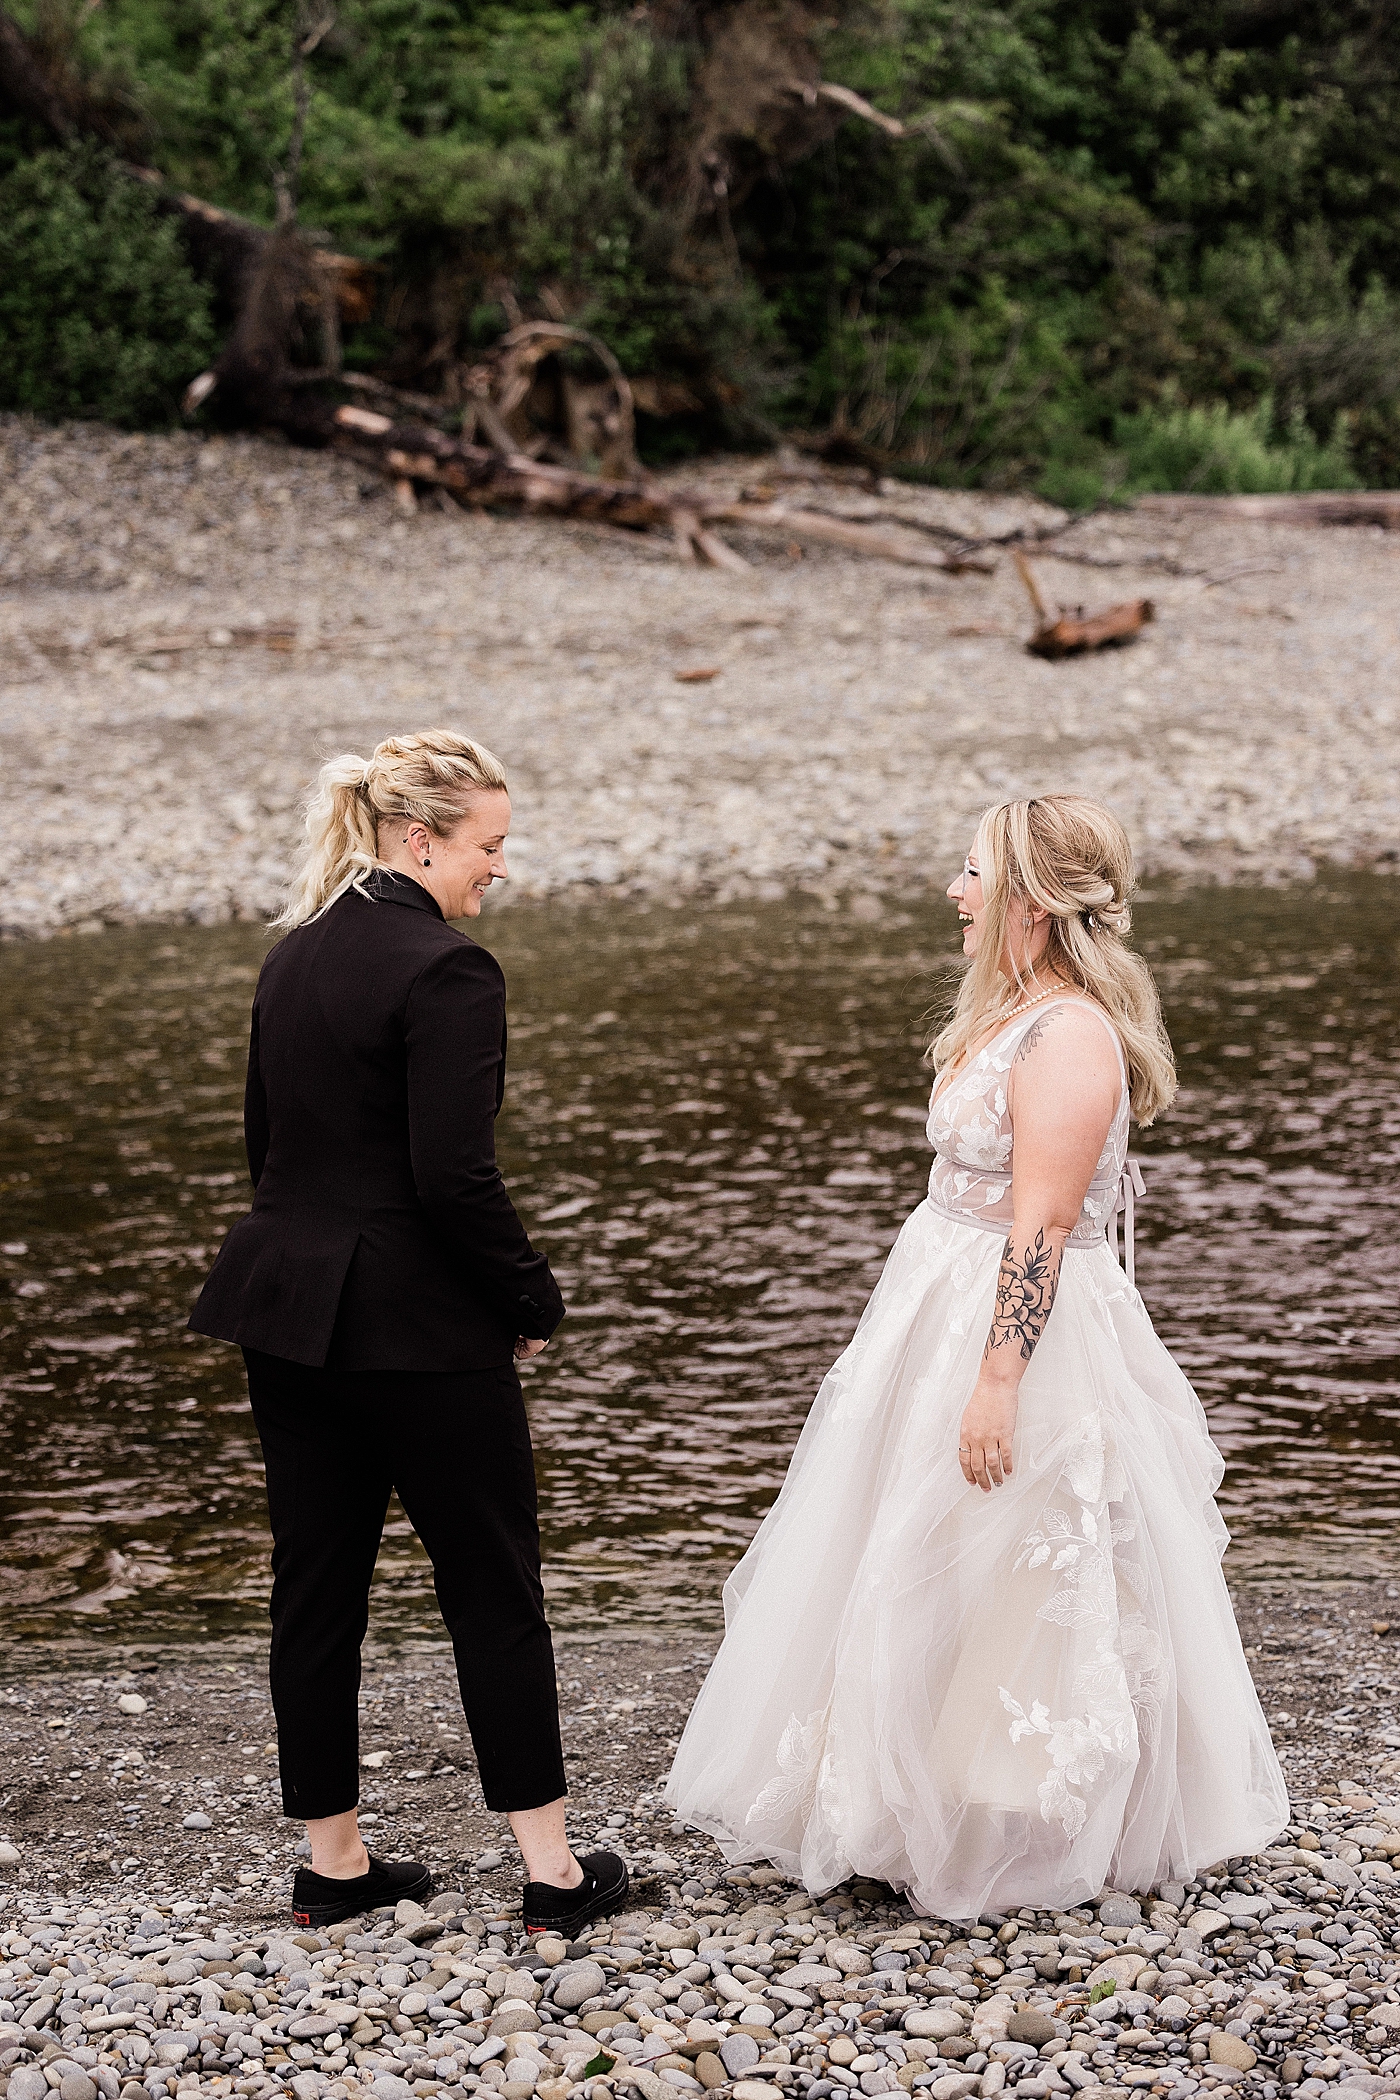 First look between brides at elopement at Ruby Beach. Photo by Megan Montalvo Photography.